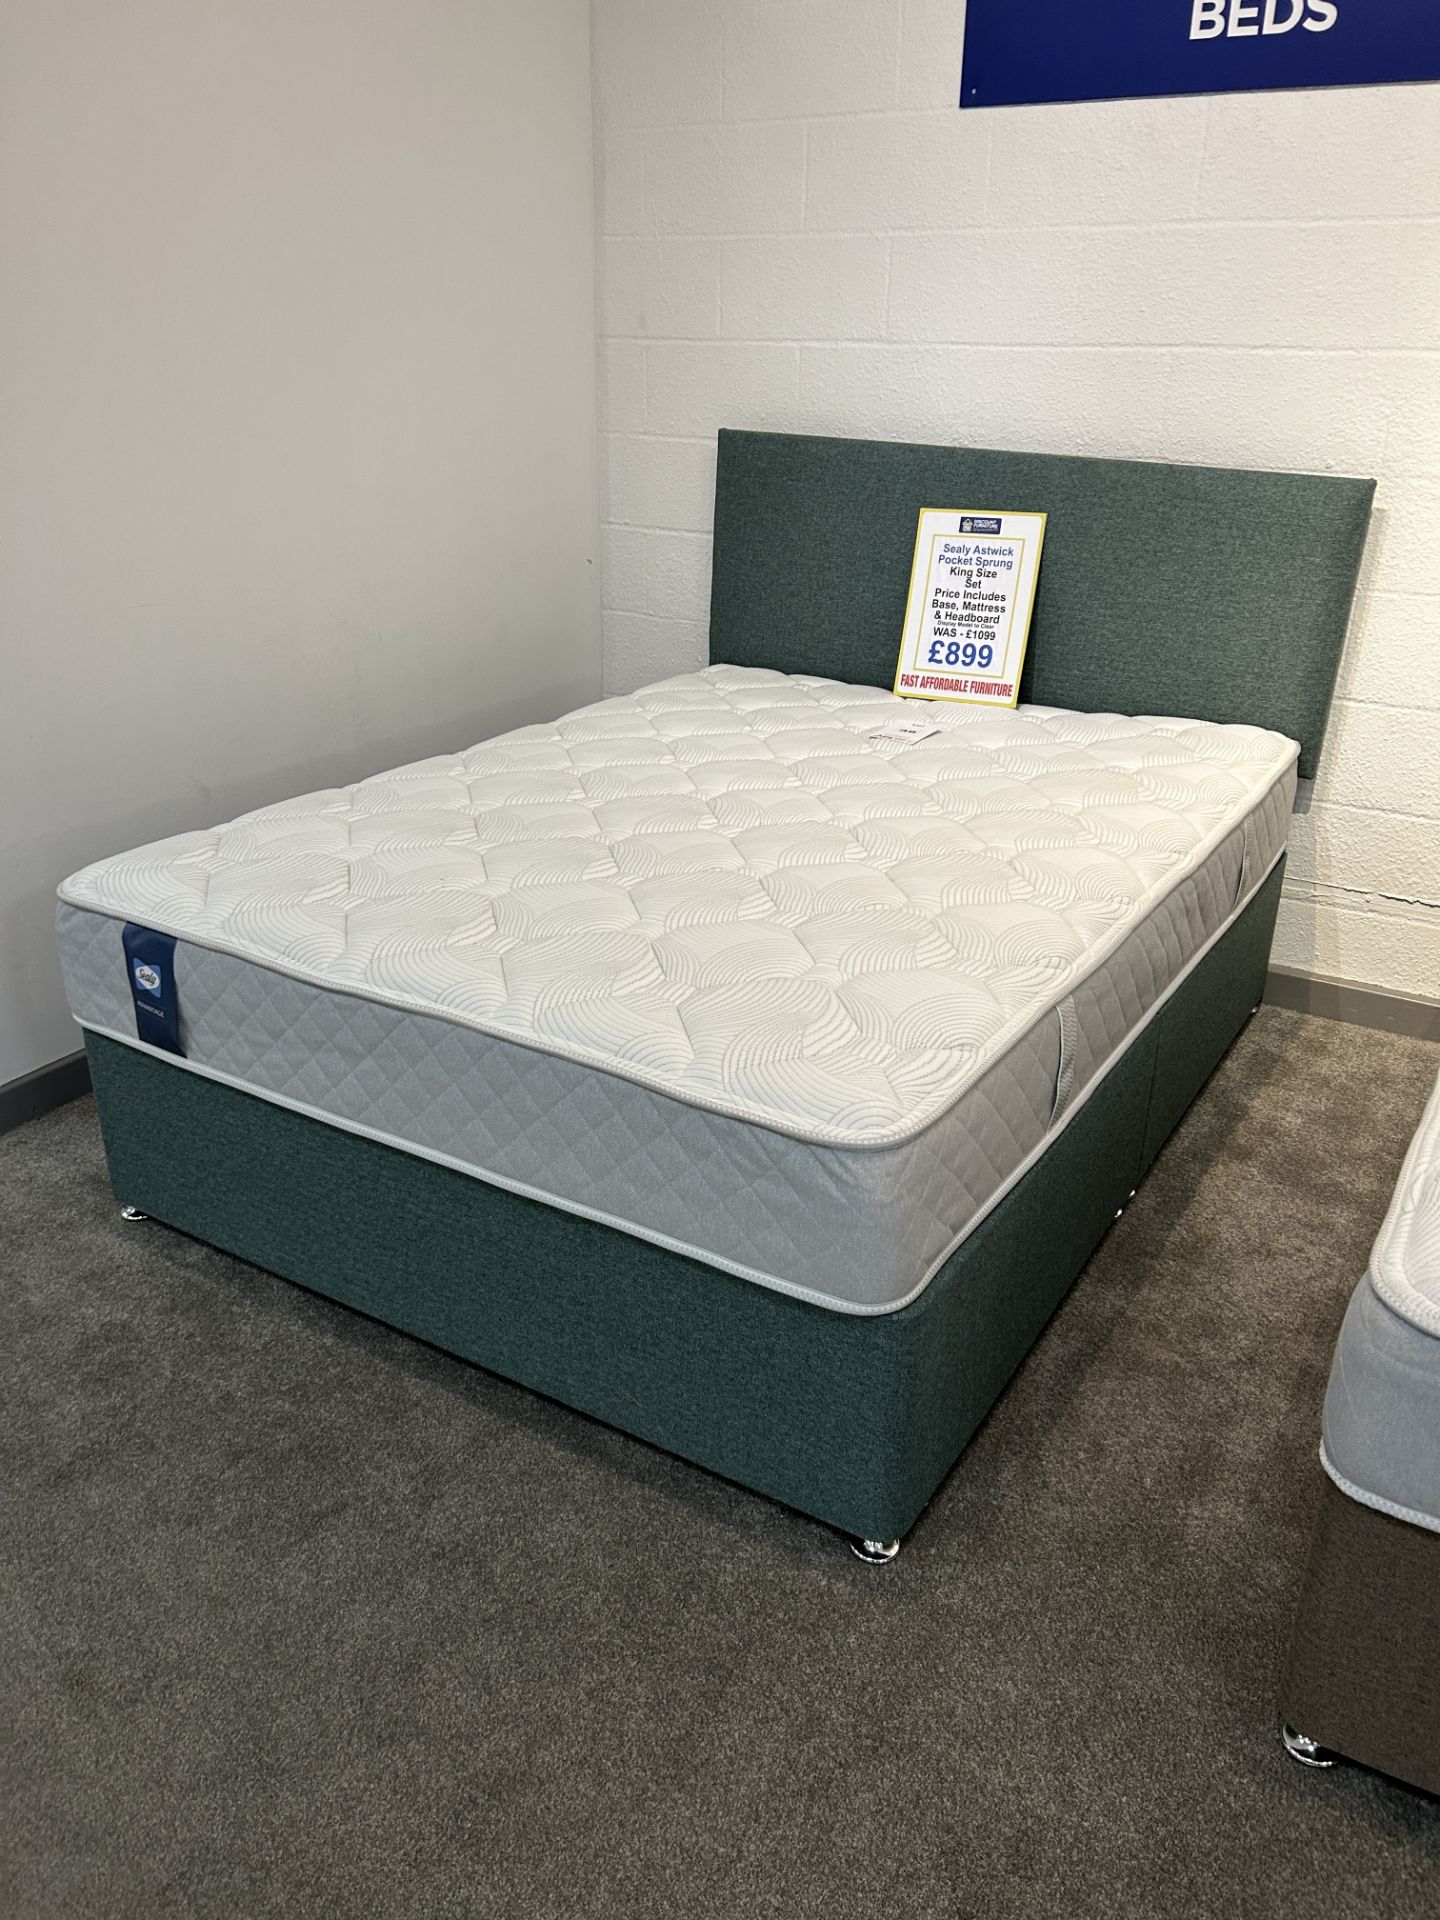 Ex-Display King Size Bed Set incl: Sealy Astwick Mattress, Base & Headboard | RRP £1,099 - Image 2 of 4